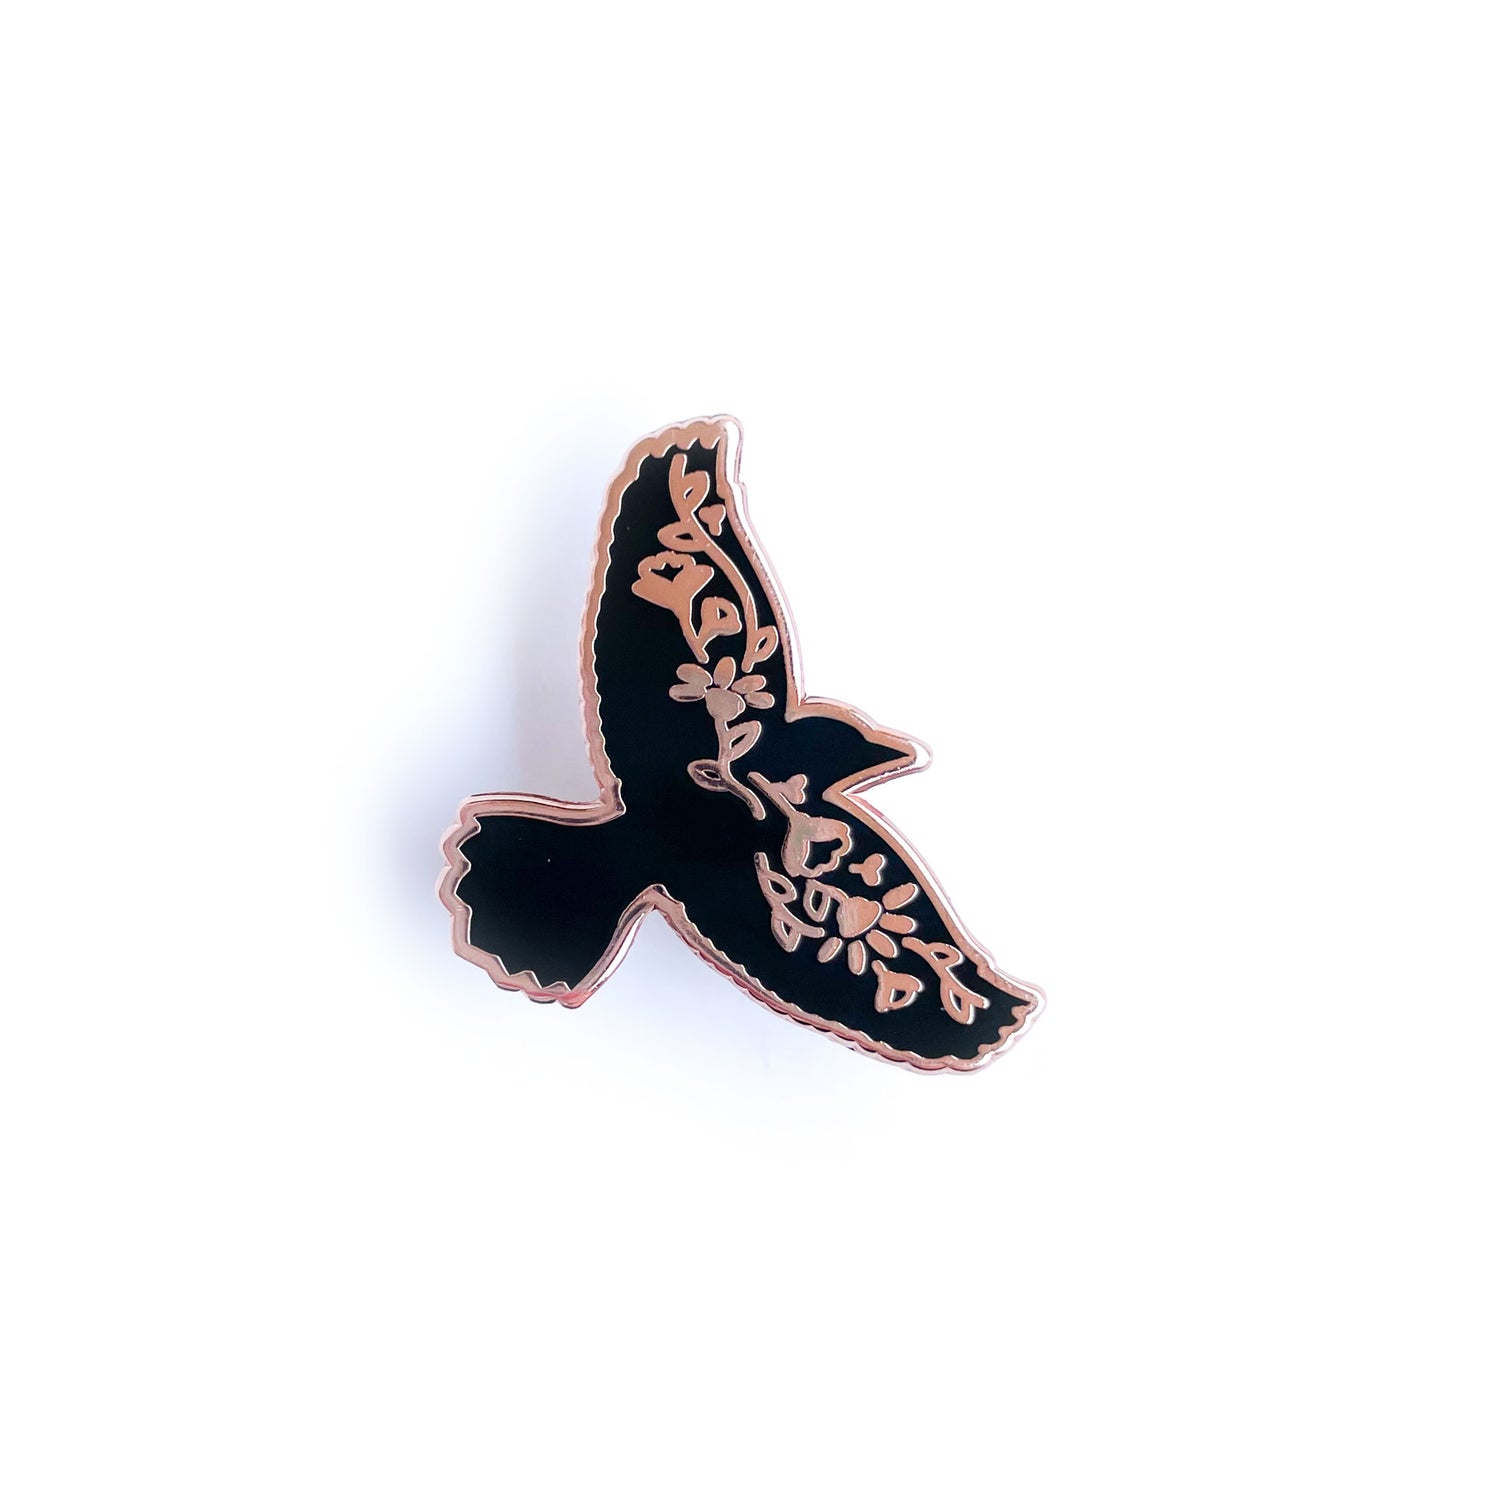 An enamel pin shaped like the silhouette of a raven with flowers along its wingspan. 